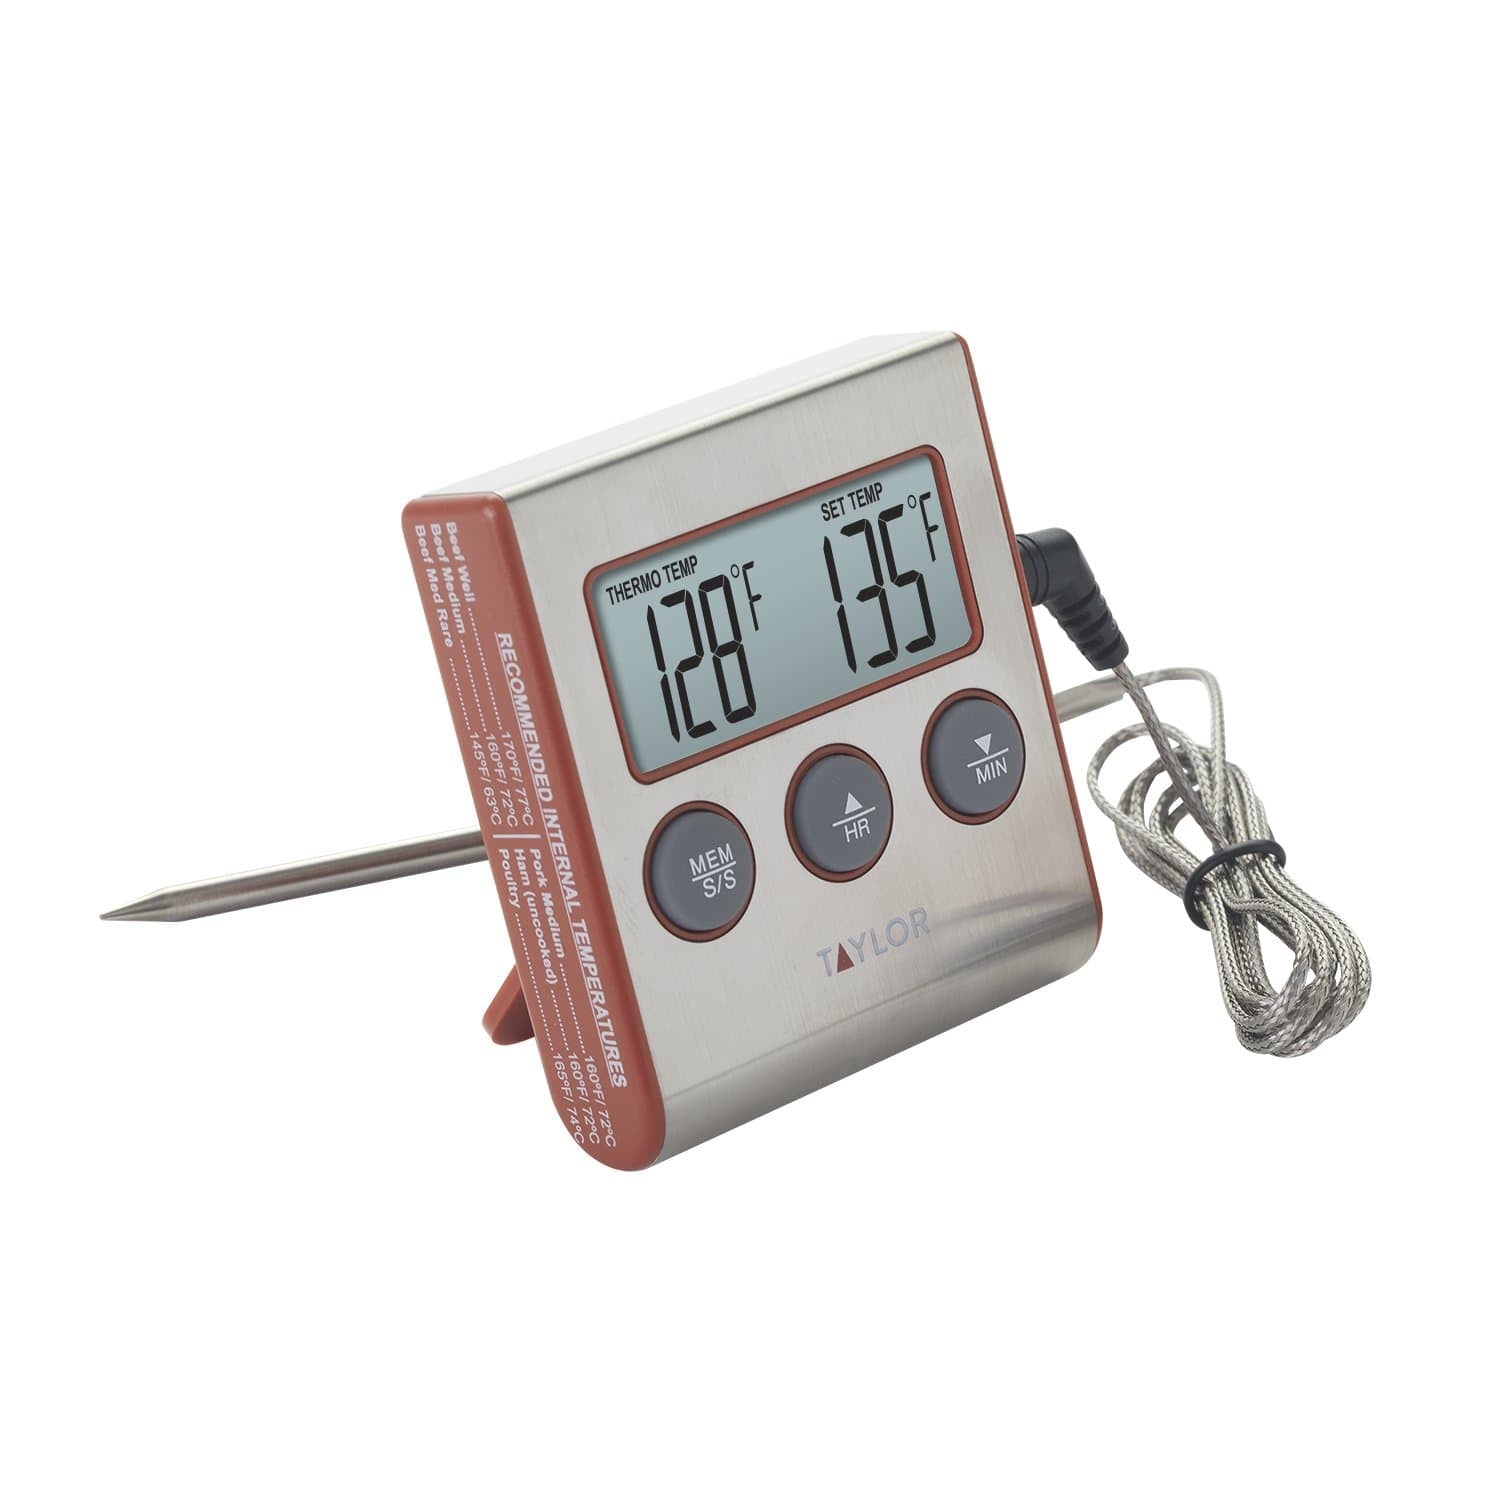 Taylor Classic Series Programmable Meat Thermometer with Timer and